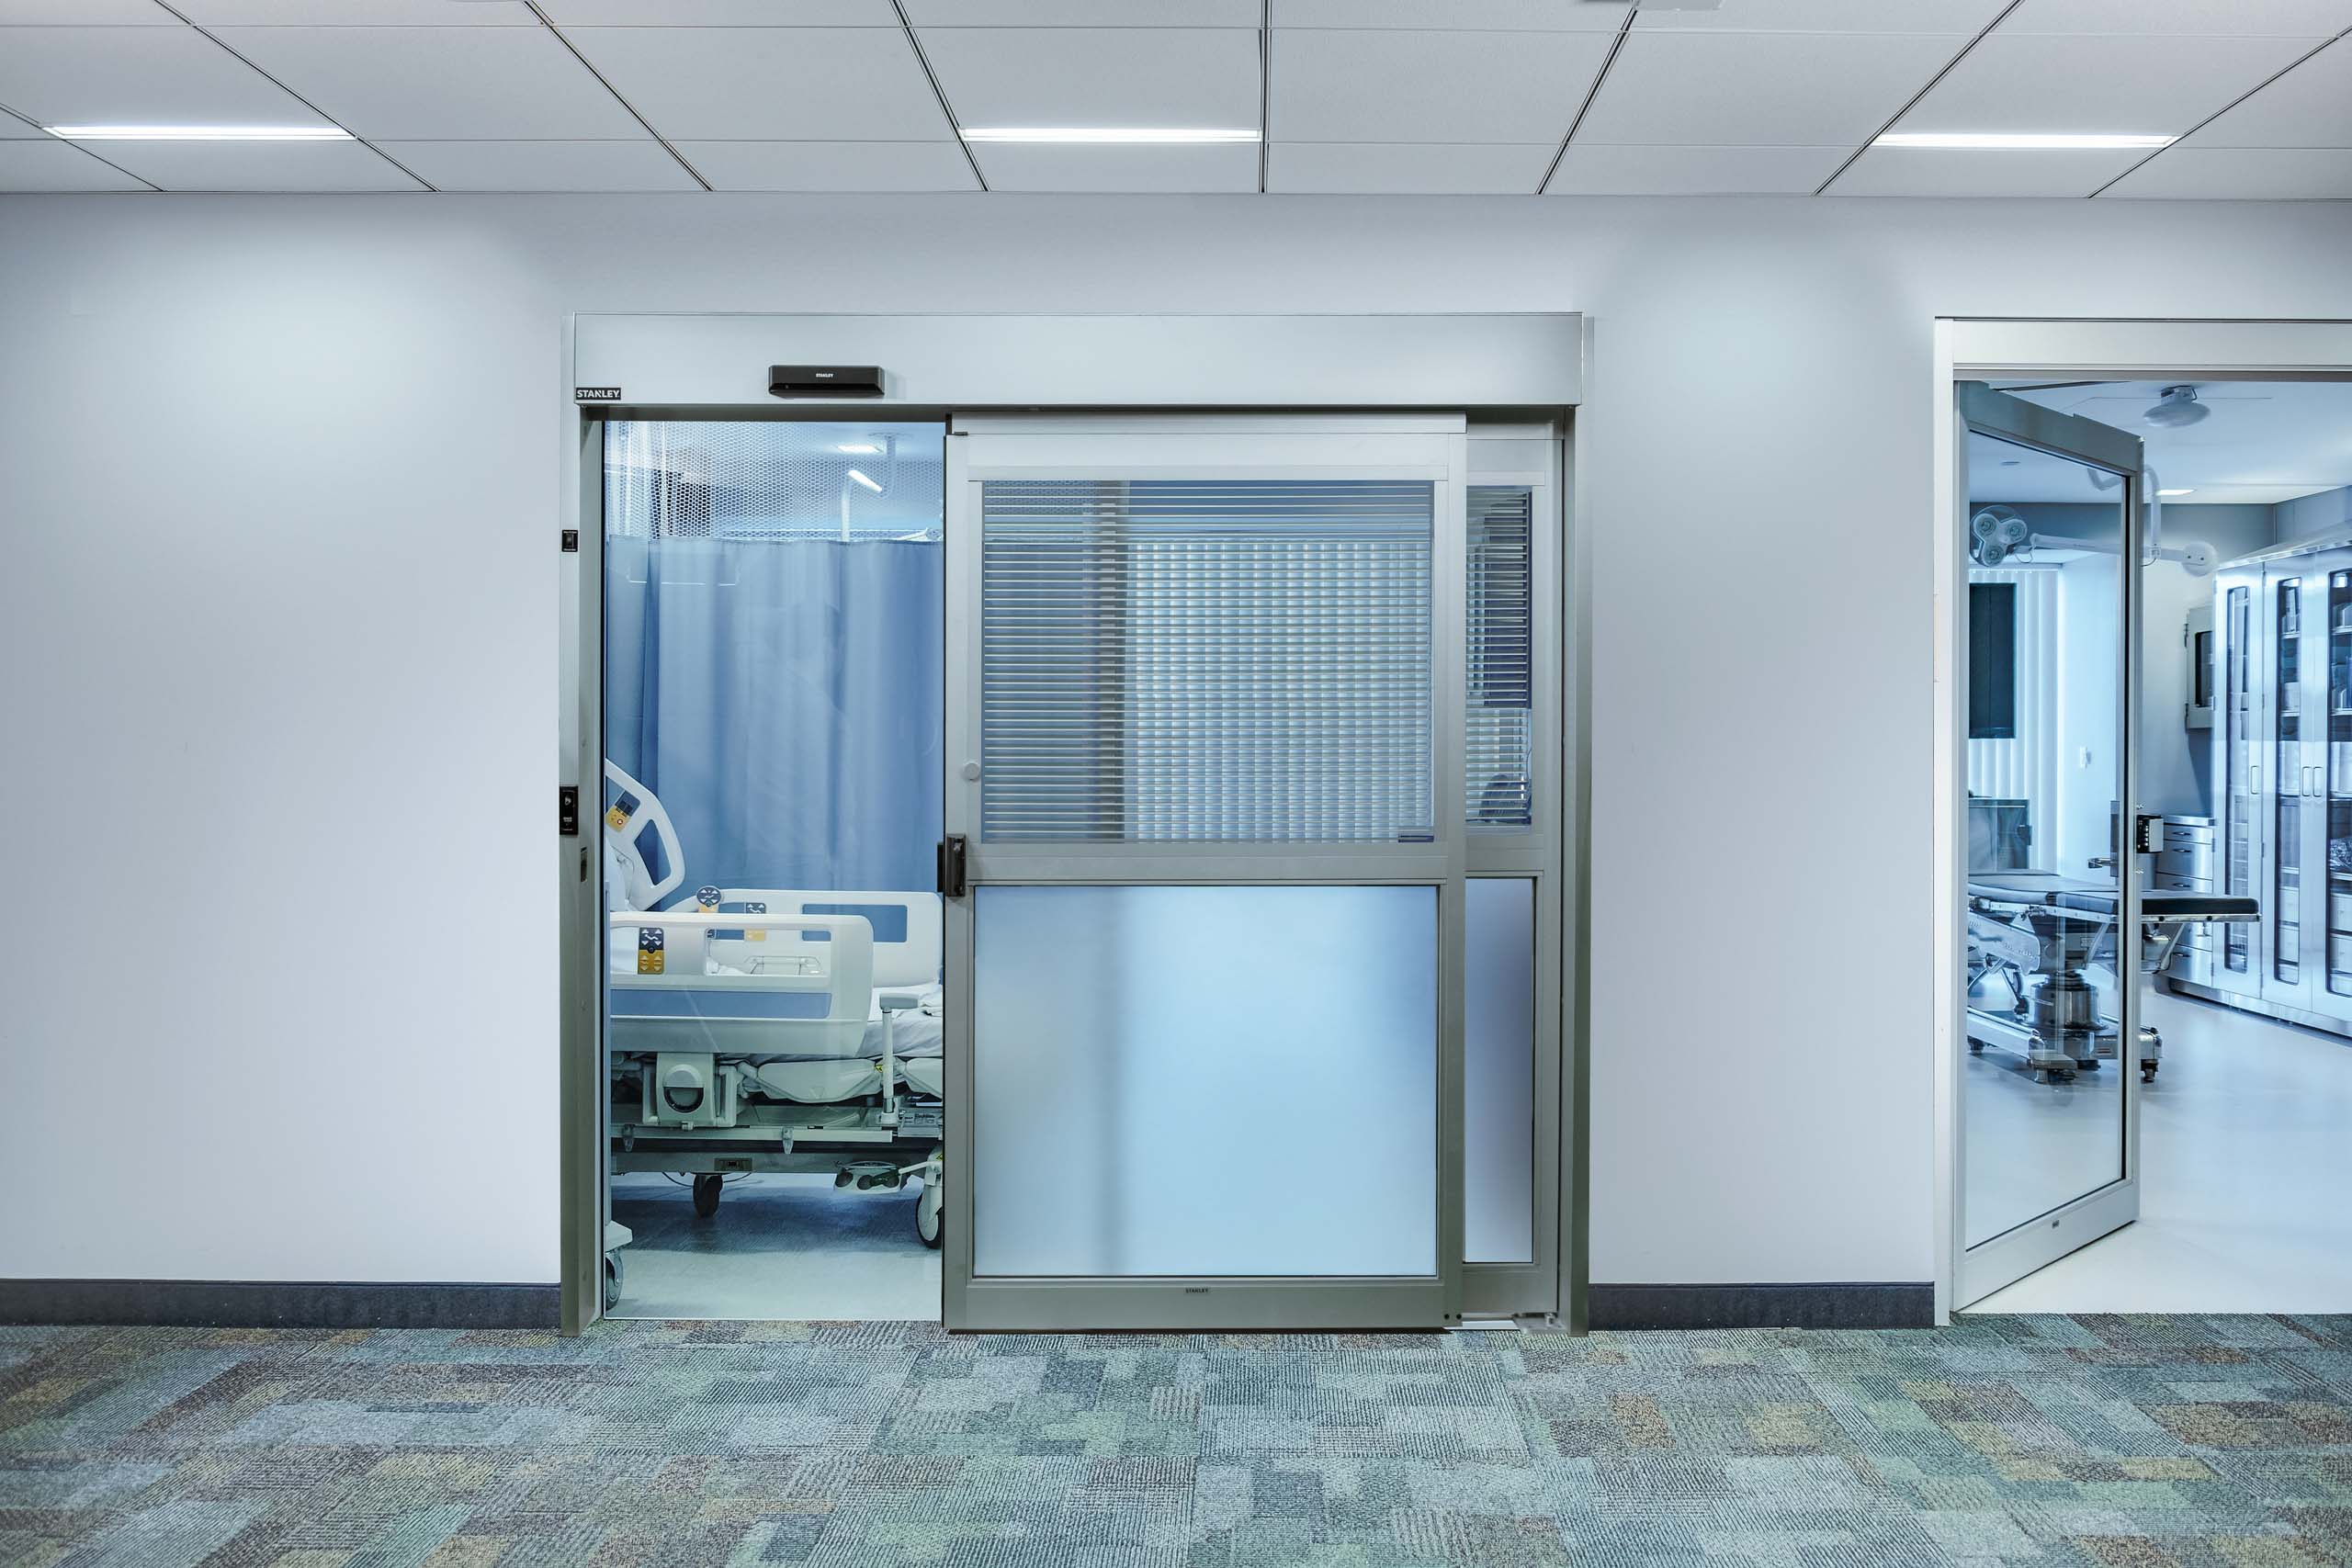 An automatic door in a hospital setting.